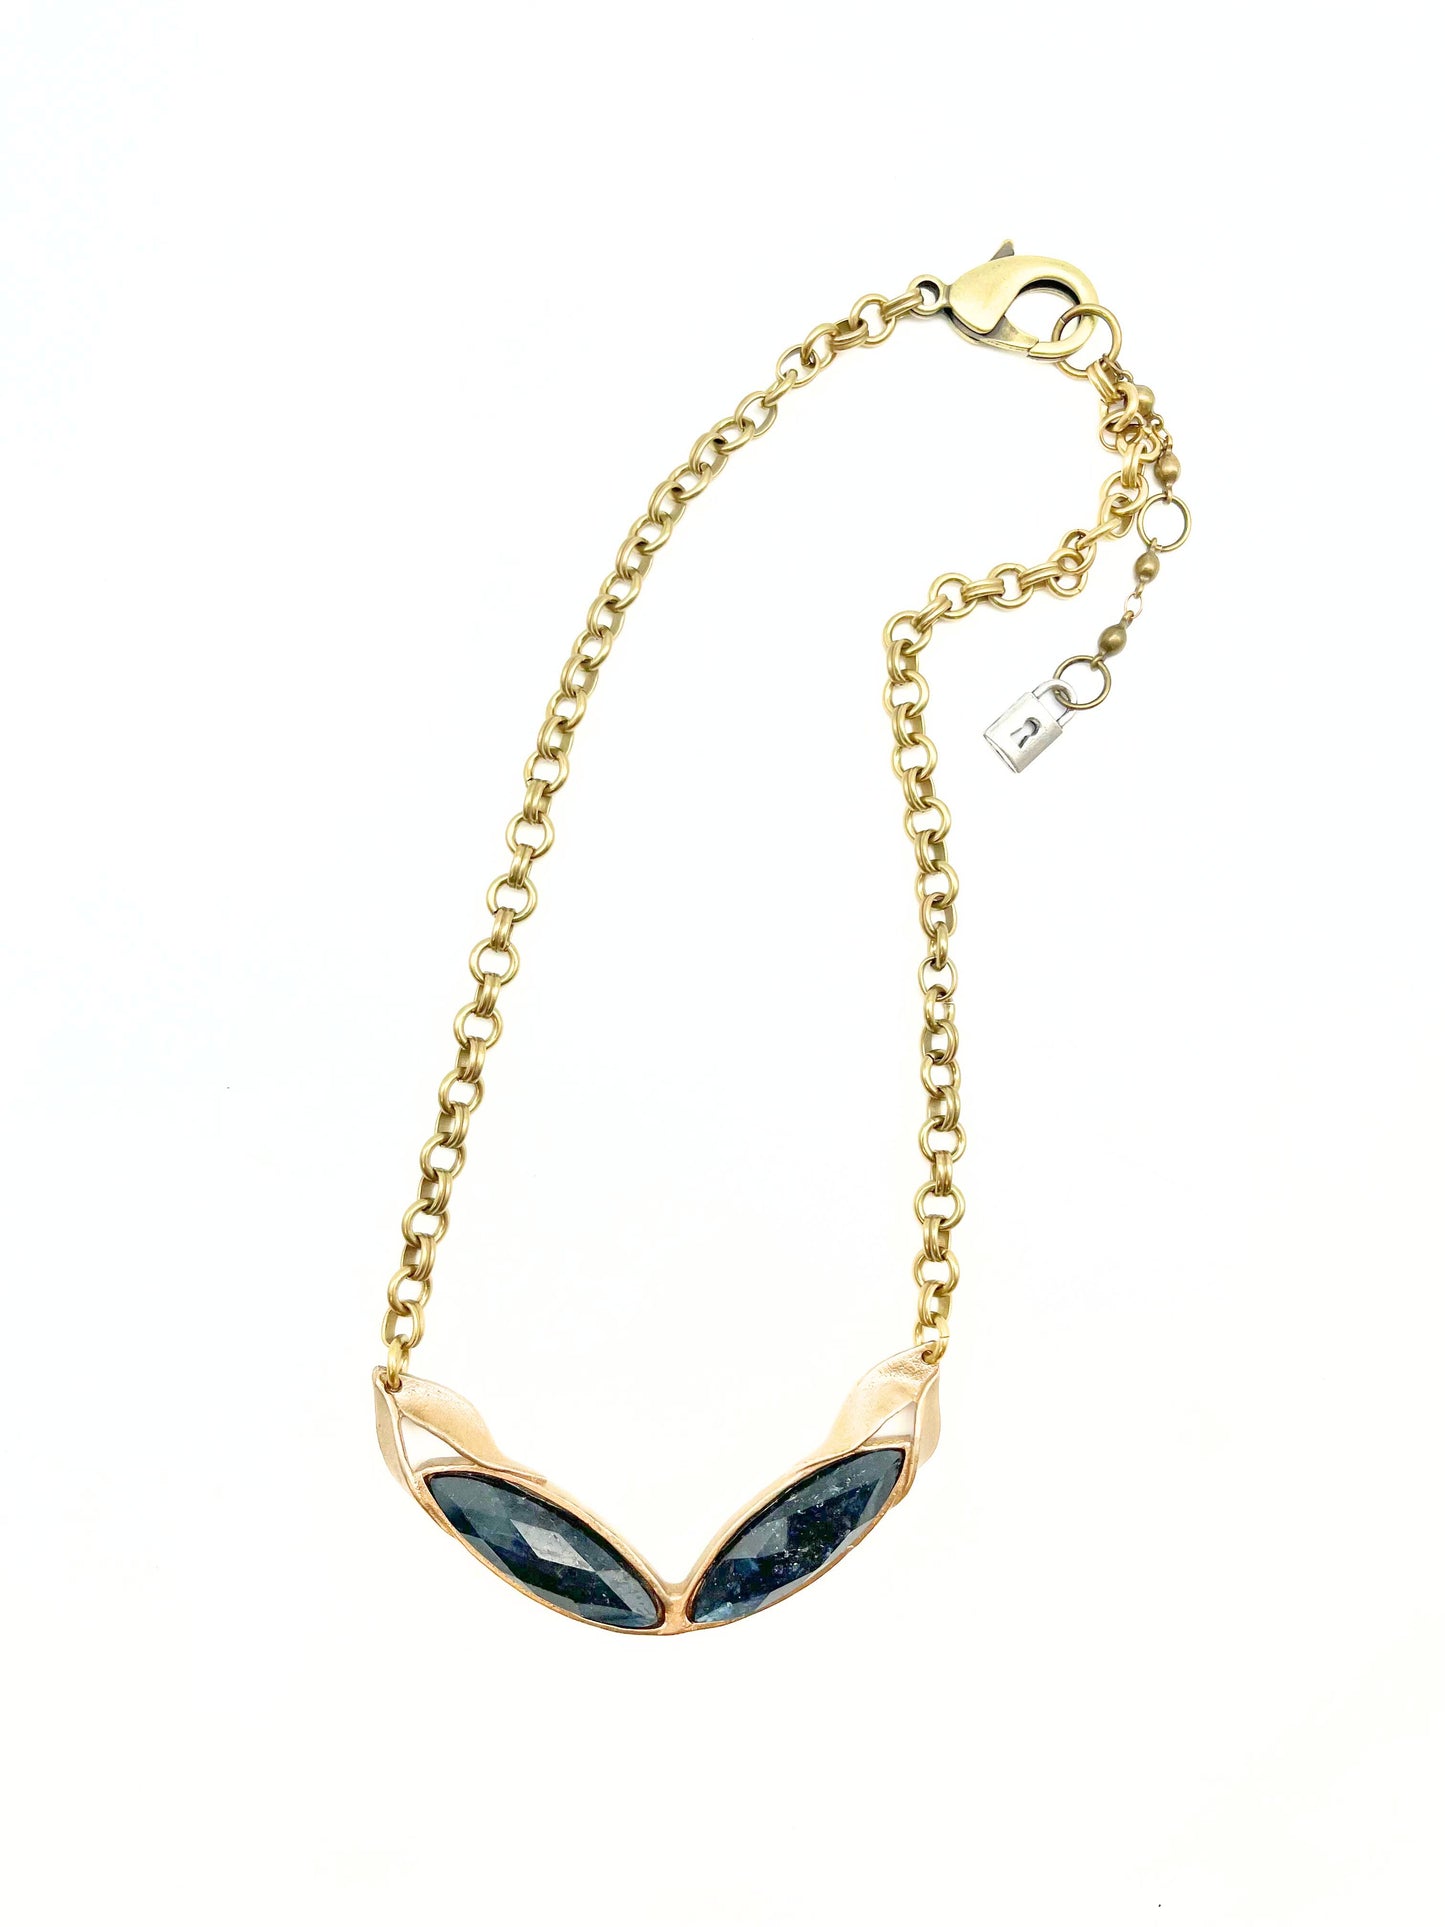 Mirrored marquise cut gemstone and petal necklace- Cyanite